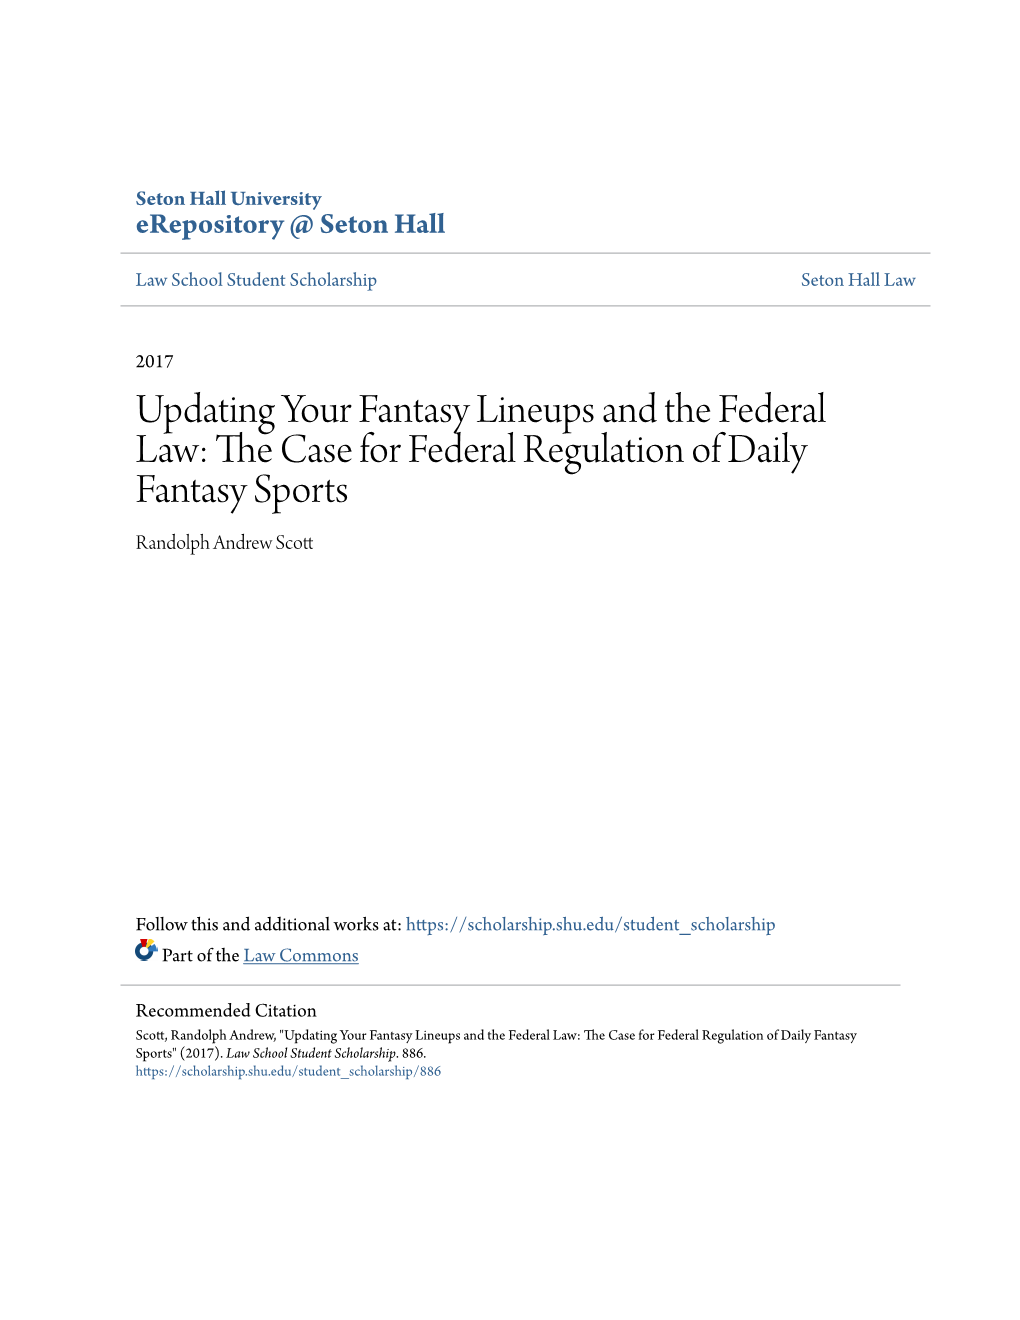 Updating Your Fantasy Lineups and the Federal Law: the Ac Se for Federal Regulation of Daily Fantasy Sports Randolph Andrew Scott